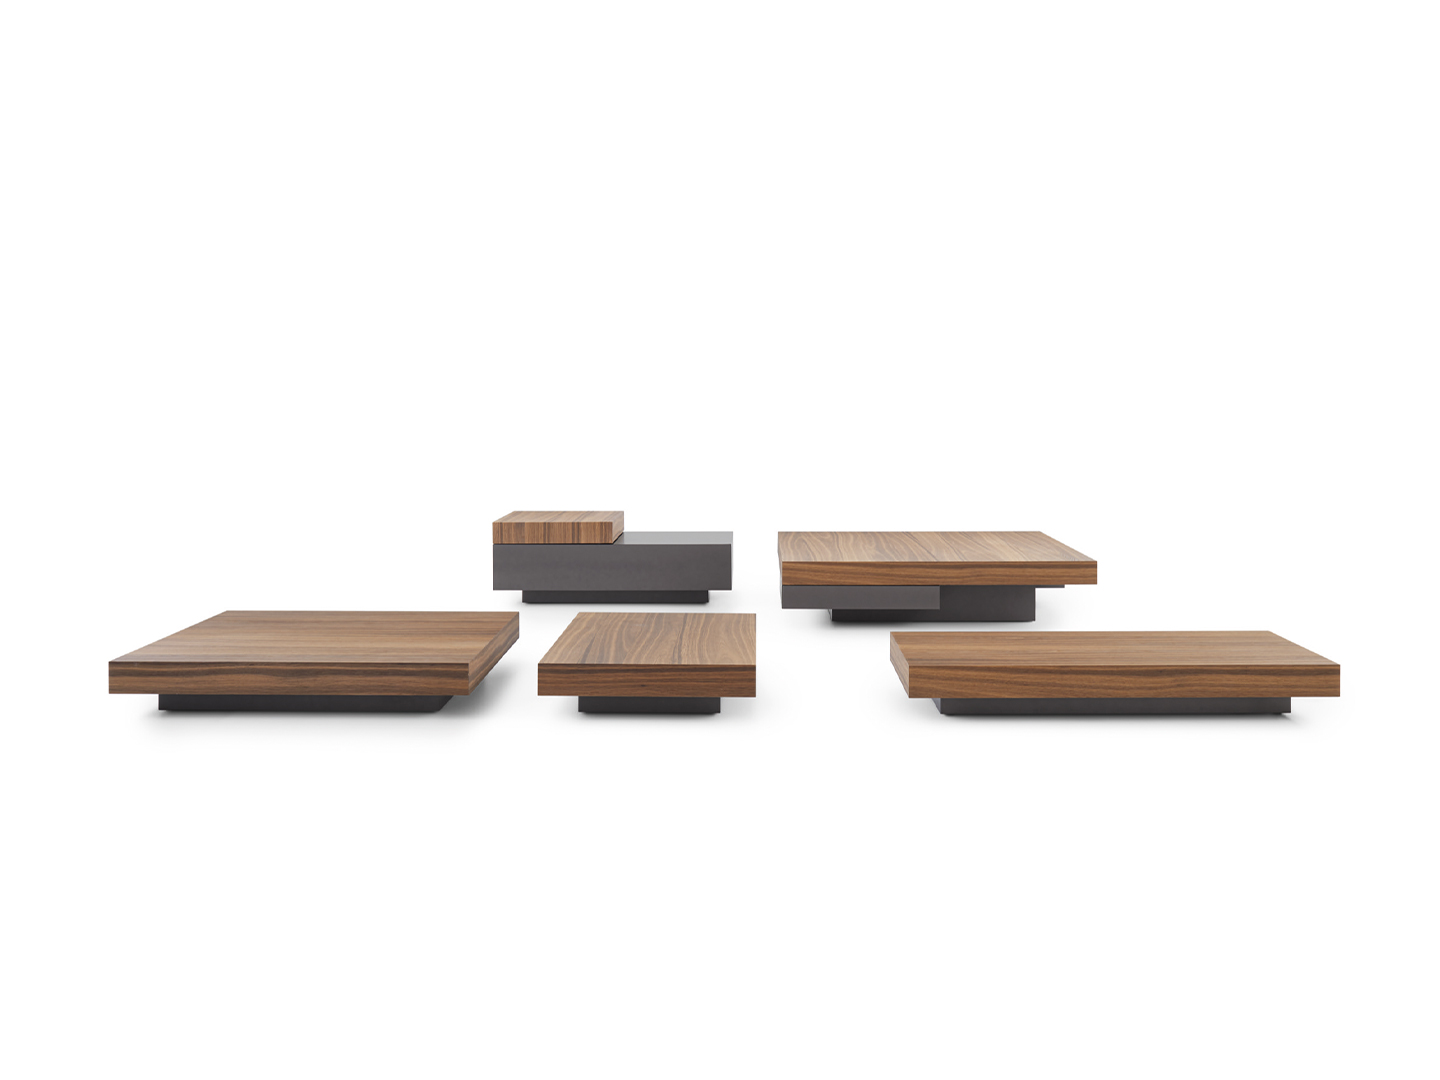 Marteen Coffee table - Small tables - Molteni&C